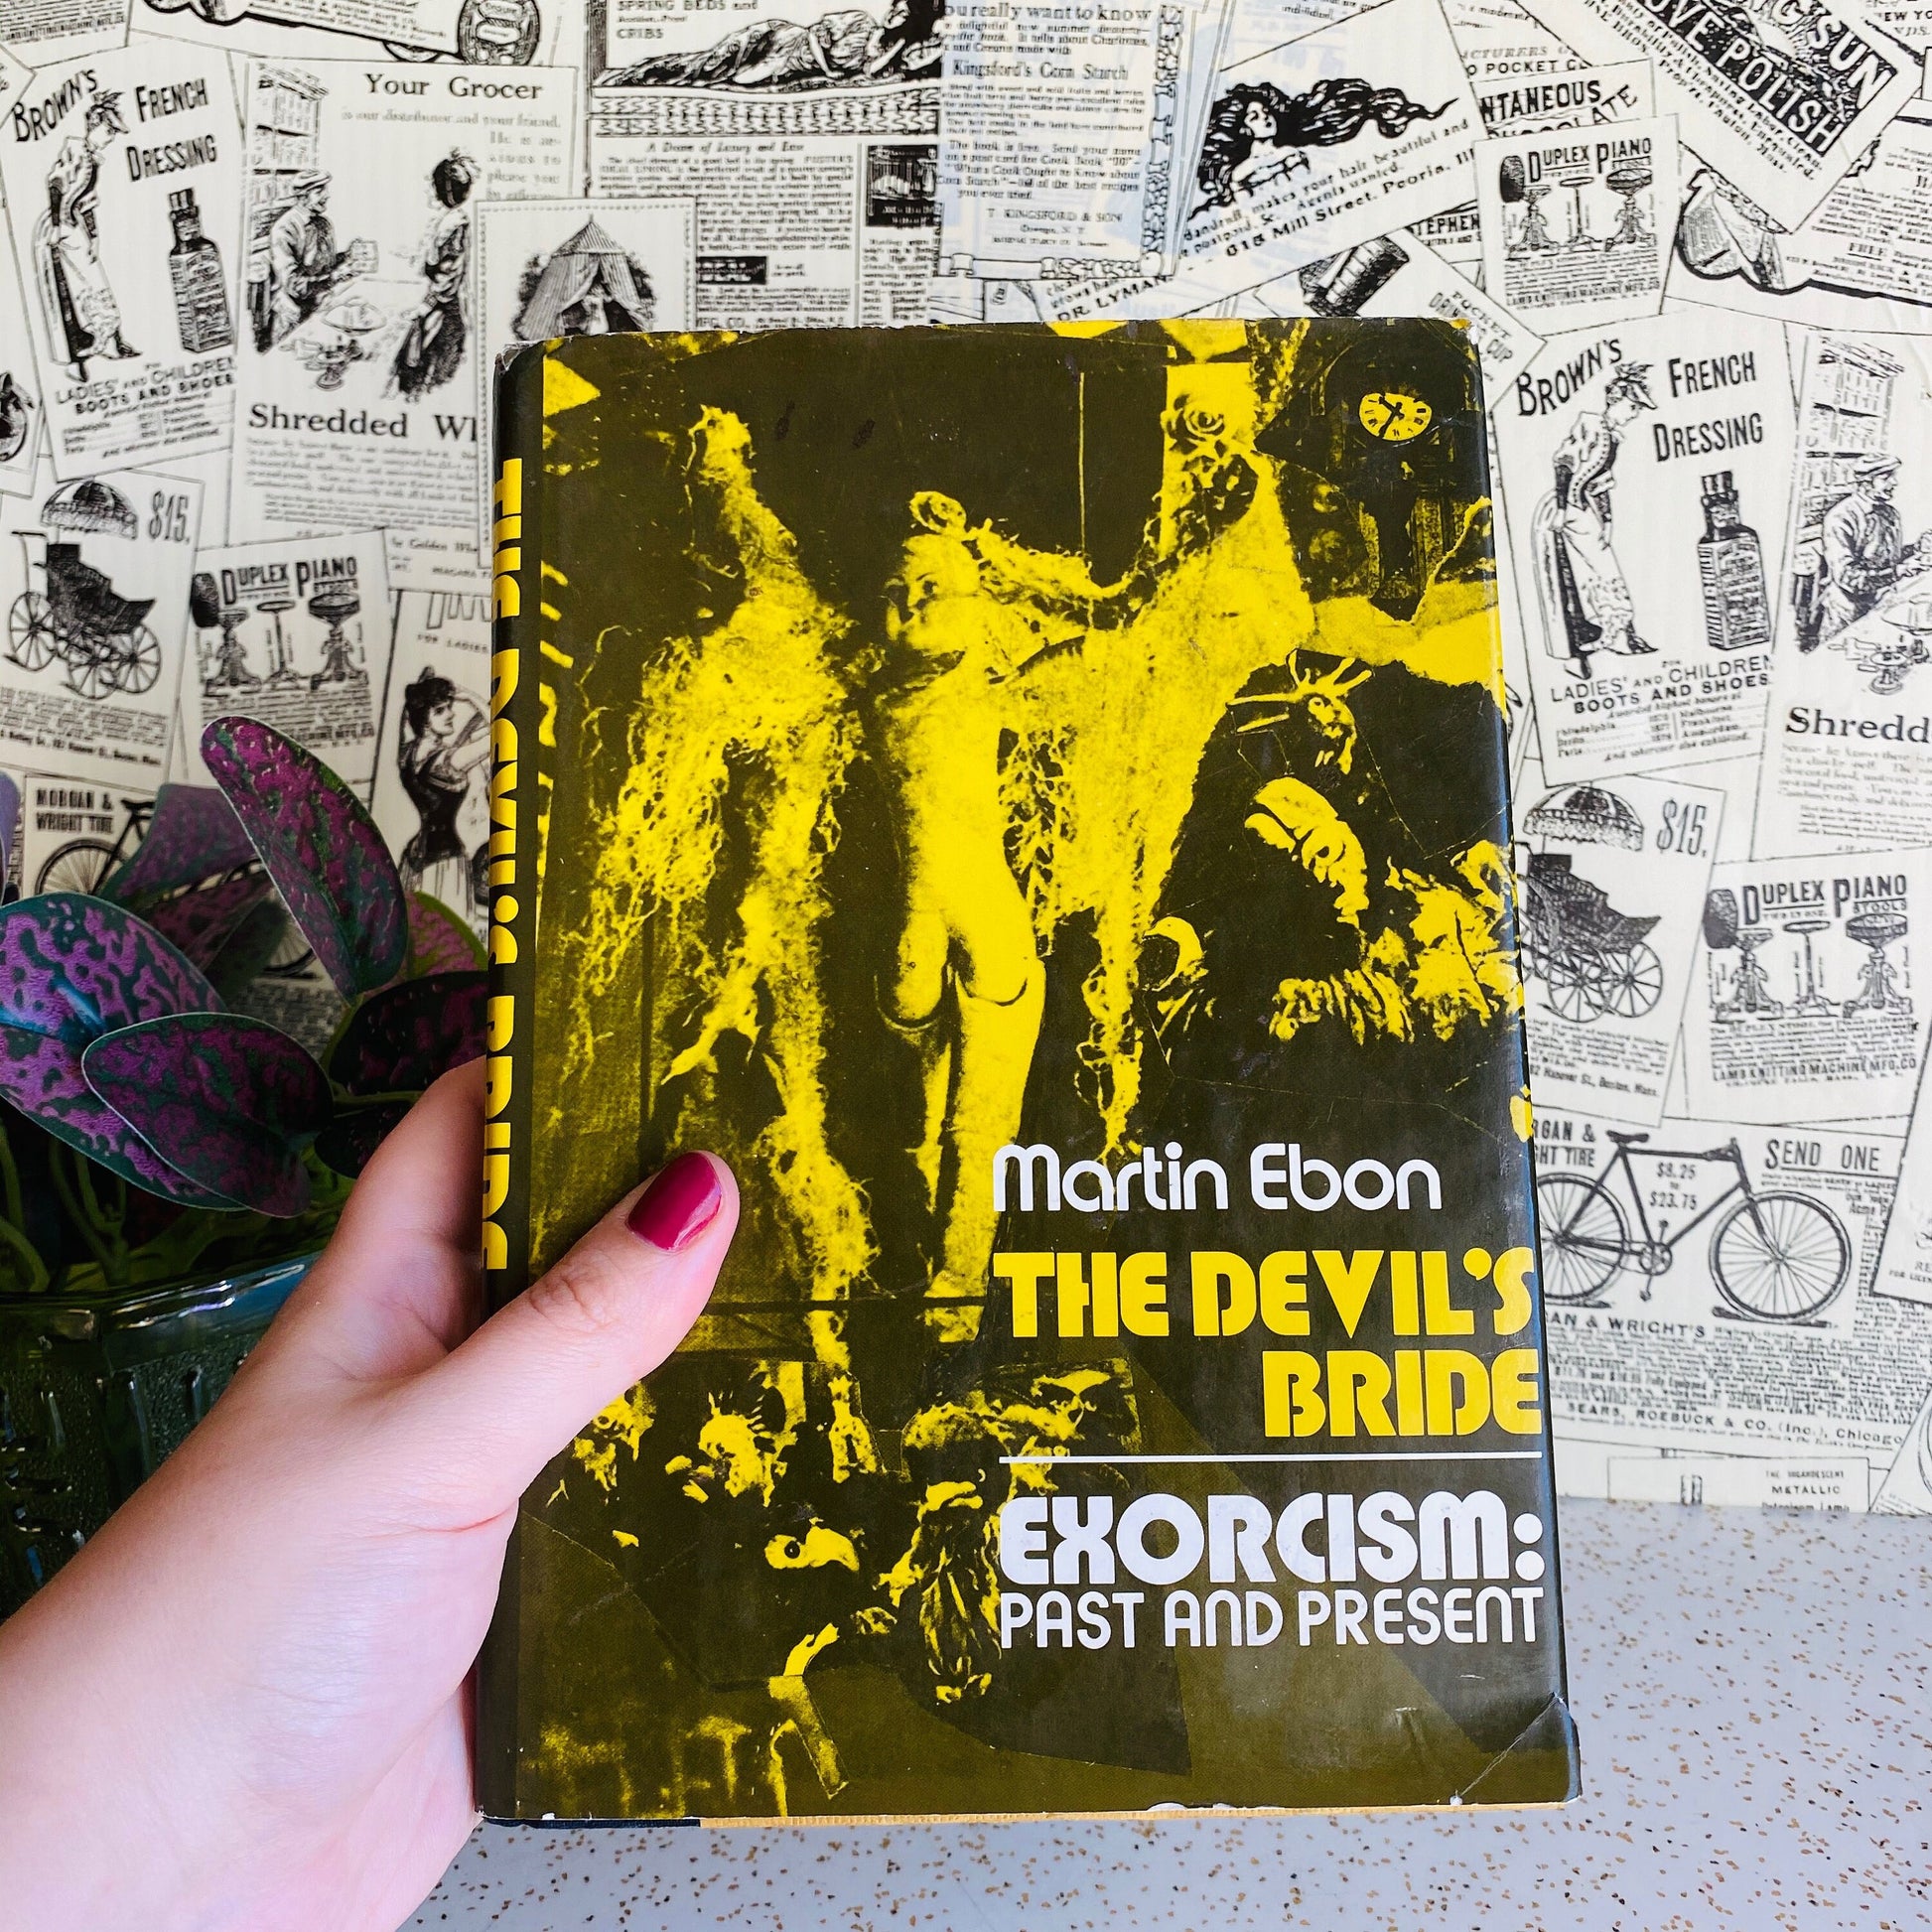 Vintage Devil's Bride Exorcism Past and Present book from 1974. 70s occult book about demons, demonology, evil spirits. Esoteric literature.